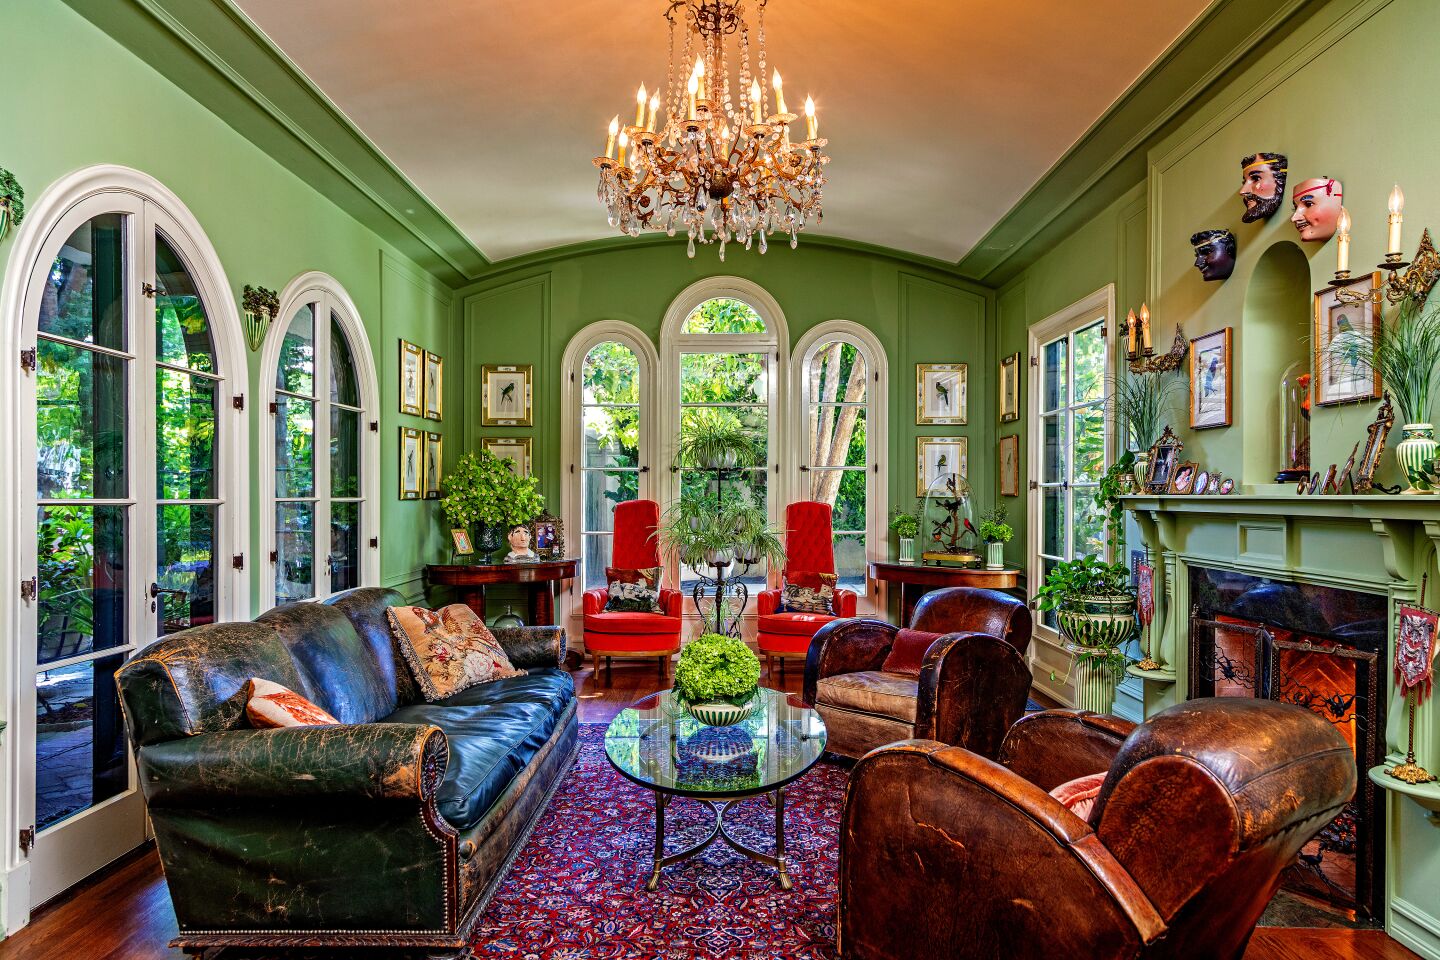 The family room with light green walls, windows overlooking greenery, living room furniture, chandelier and a fireplace.